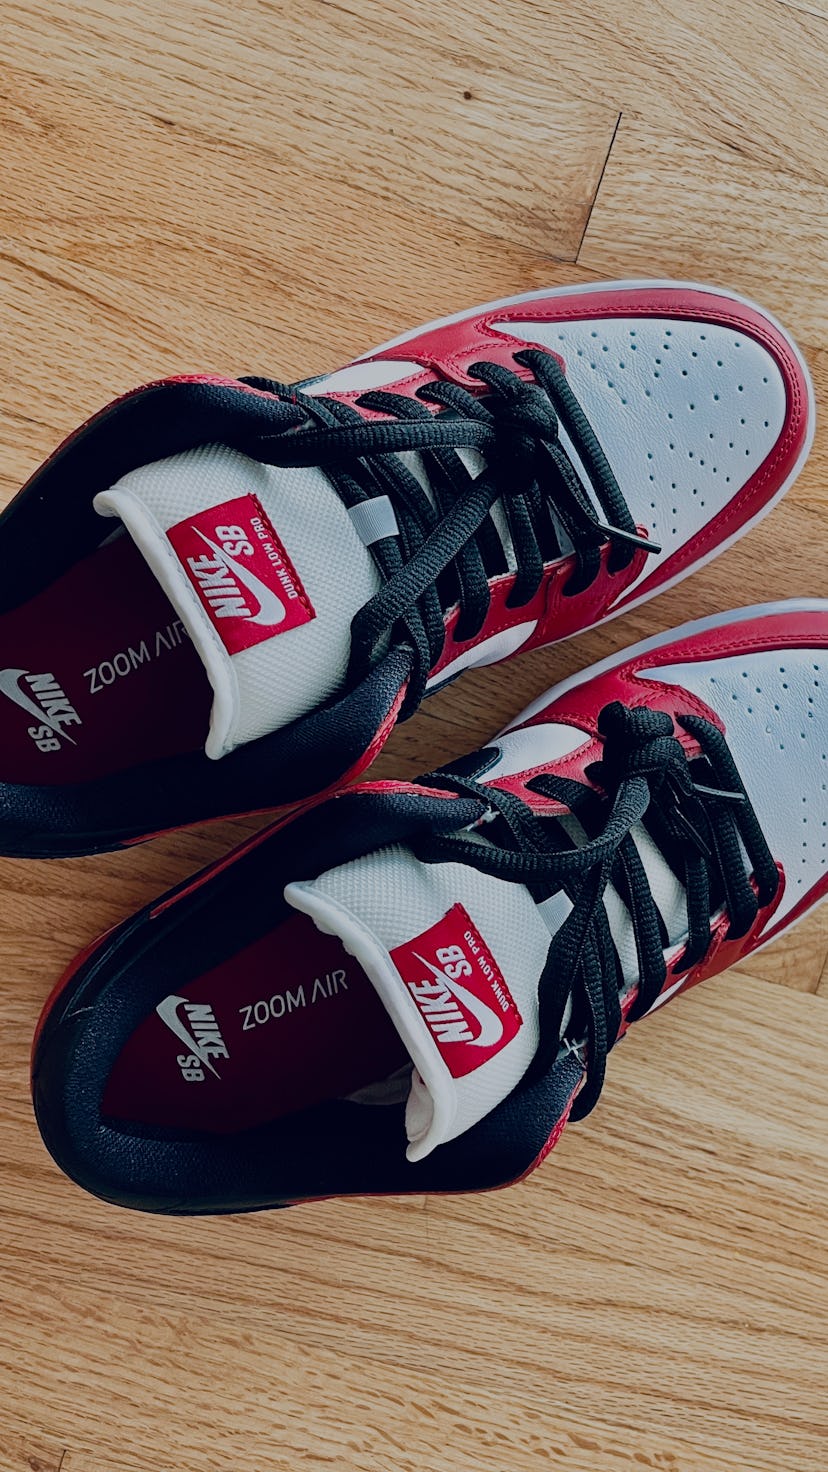 Nike Dunk Low SB J-Pack Chicago on feet review